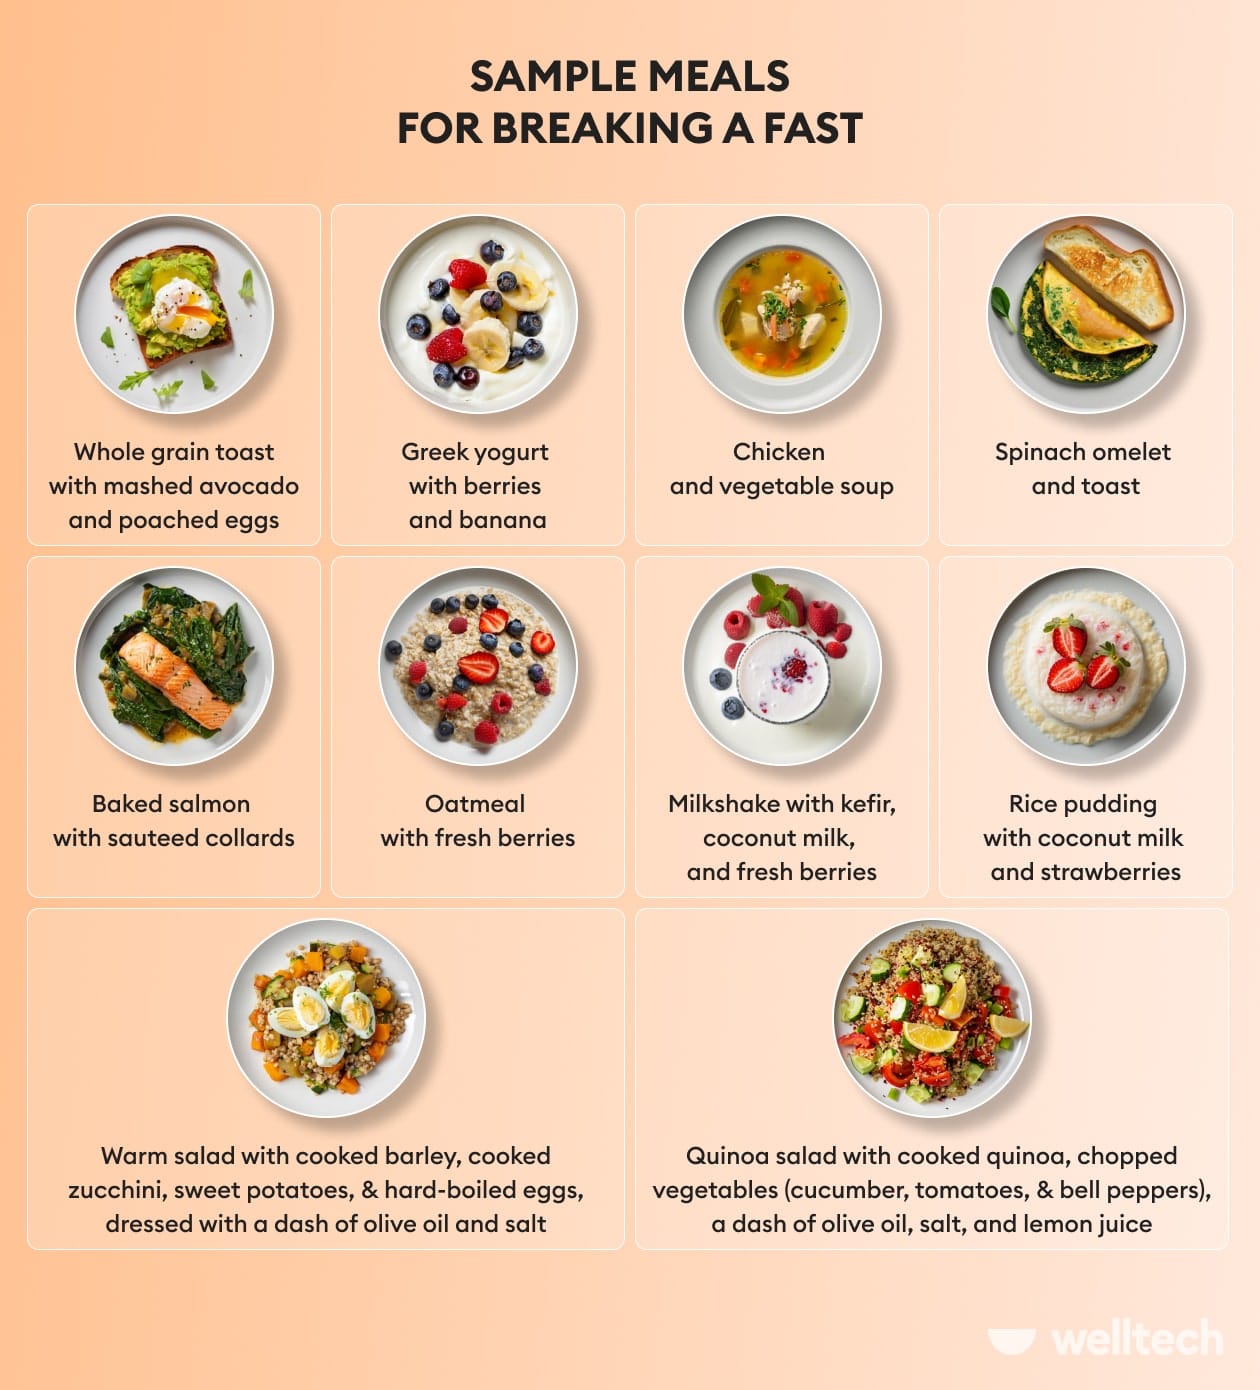 sample meals to break a fast with, with images and names, foods to avoid when breaking a fast